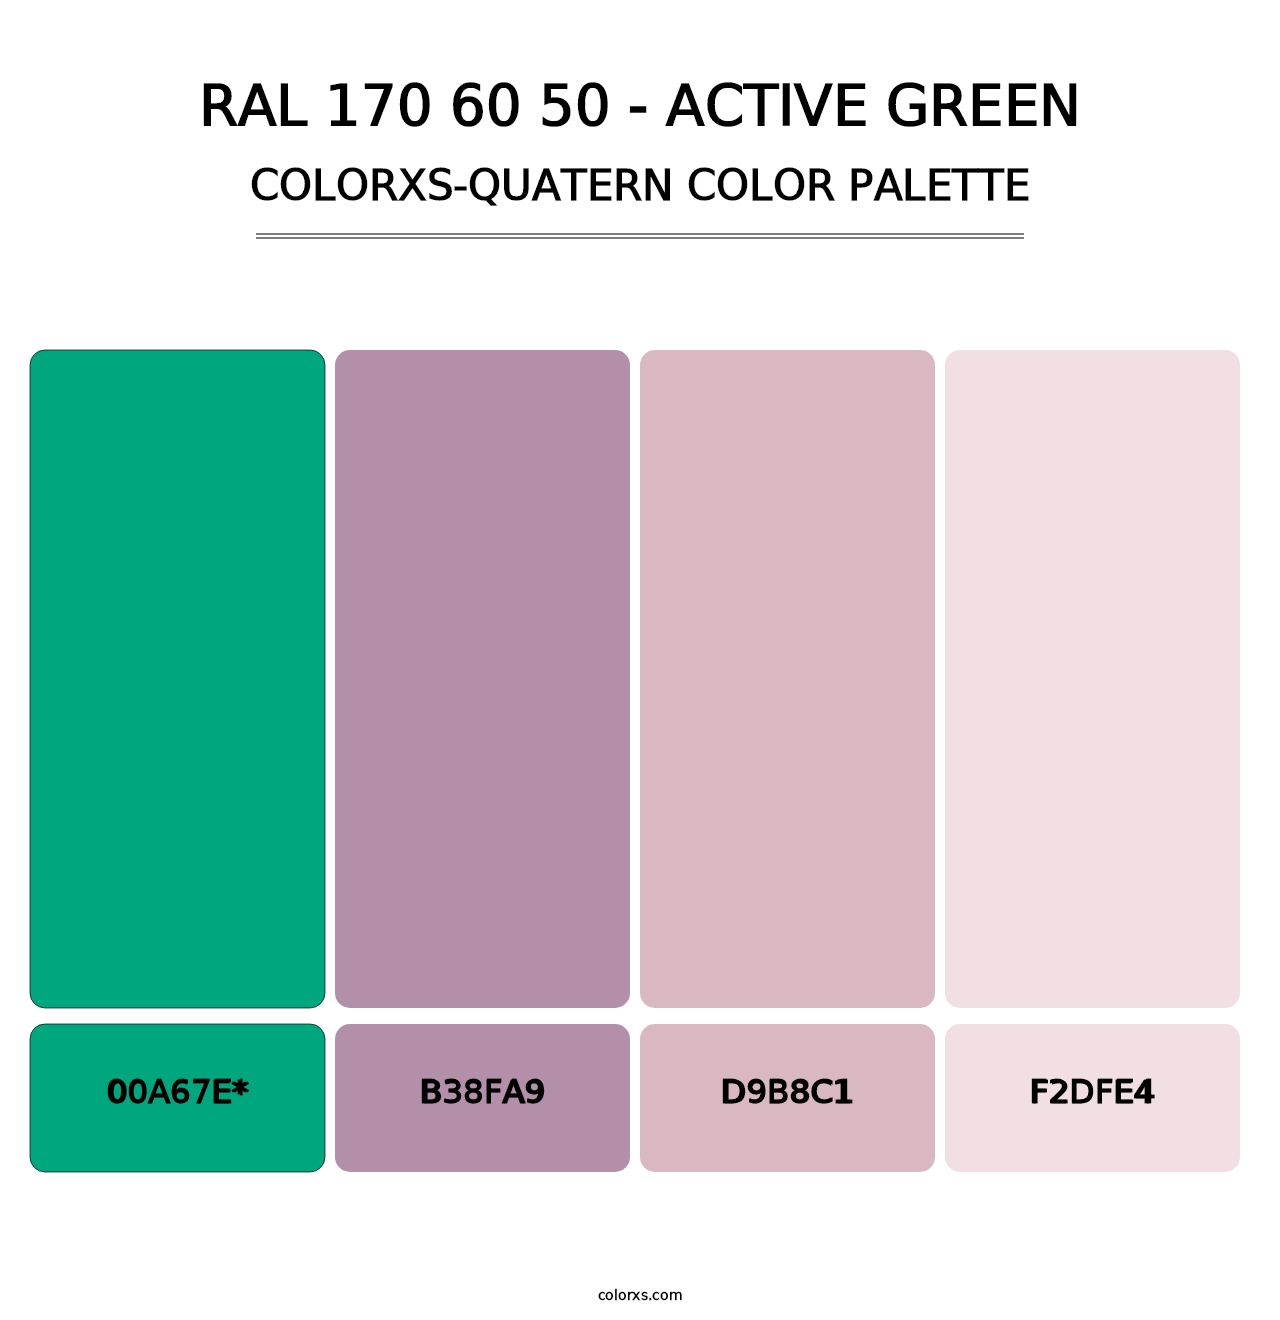 RAL 170 60 50 - Active Green - Colorxs Quatern Palette